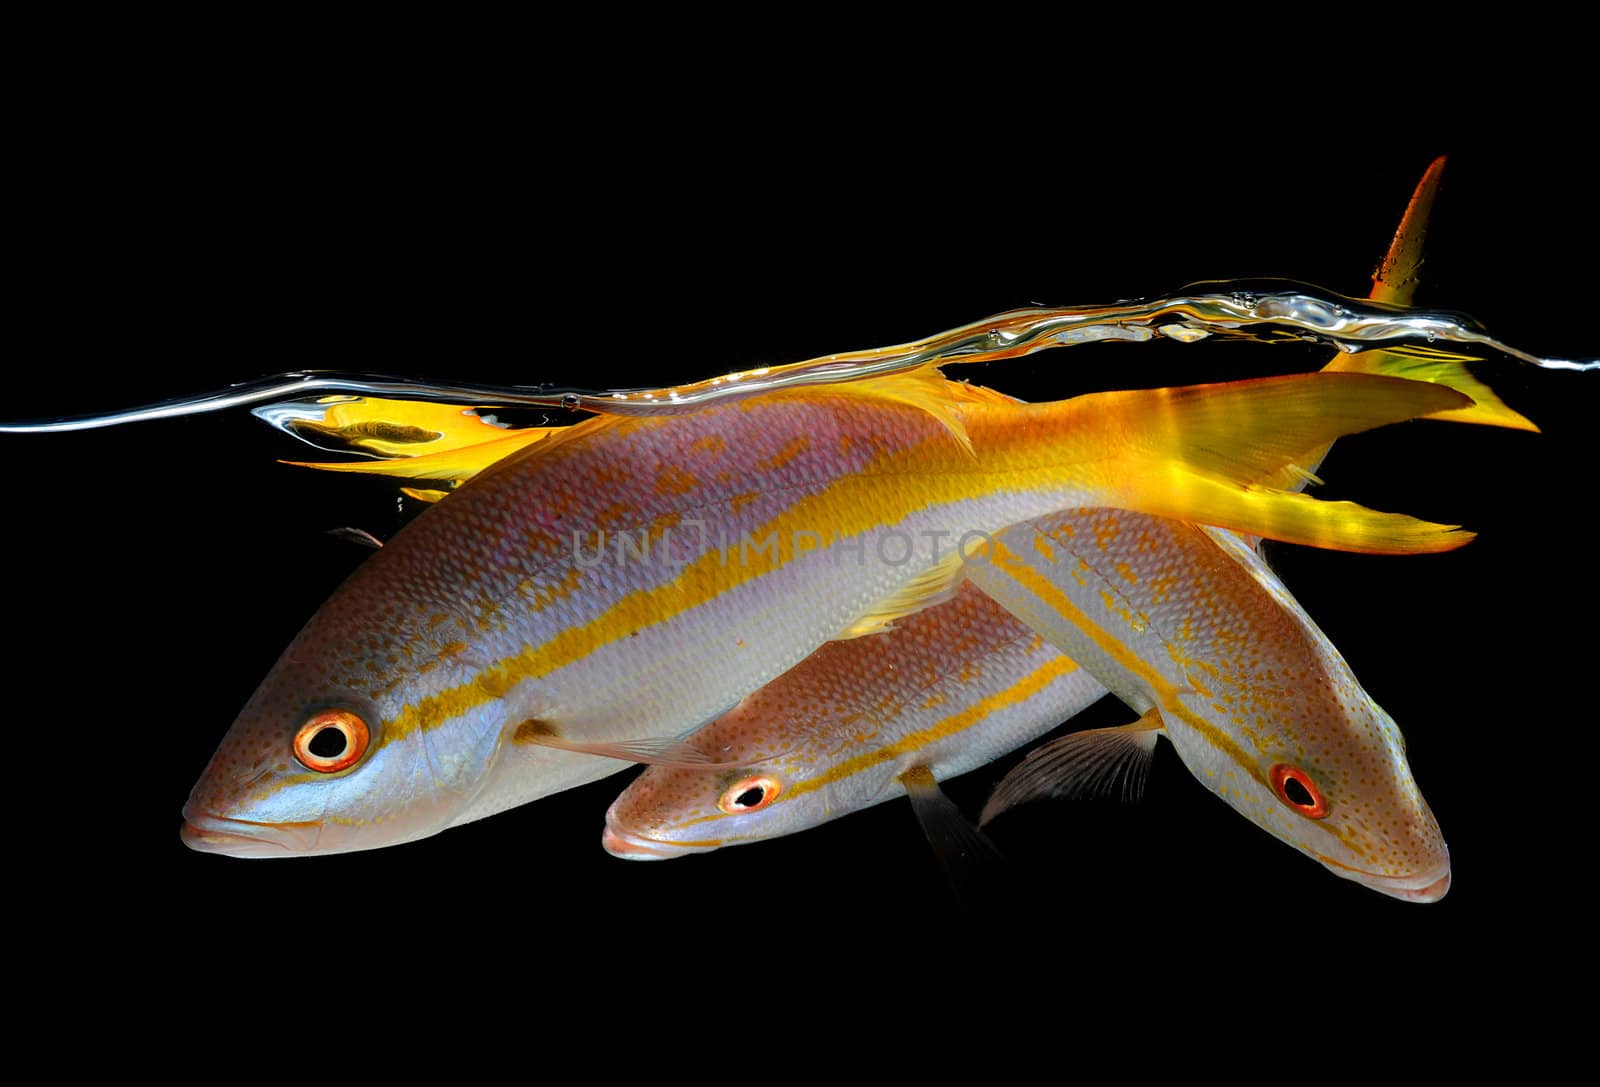 Three yellow tail snappers on black background by ftlaudgirl